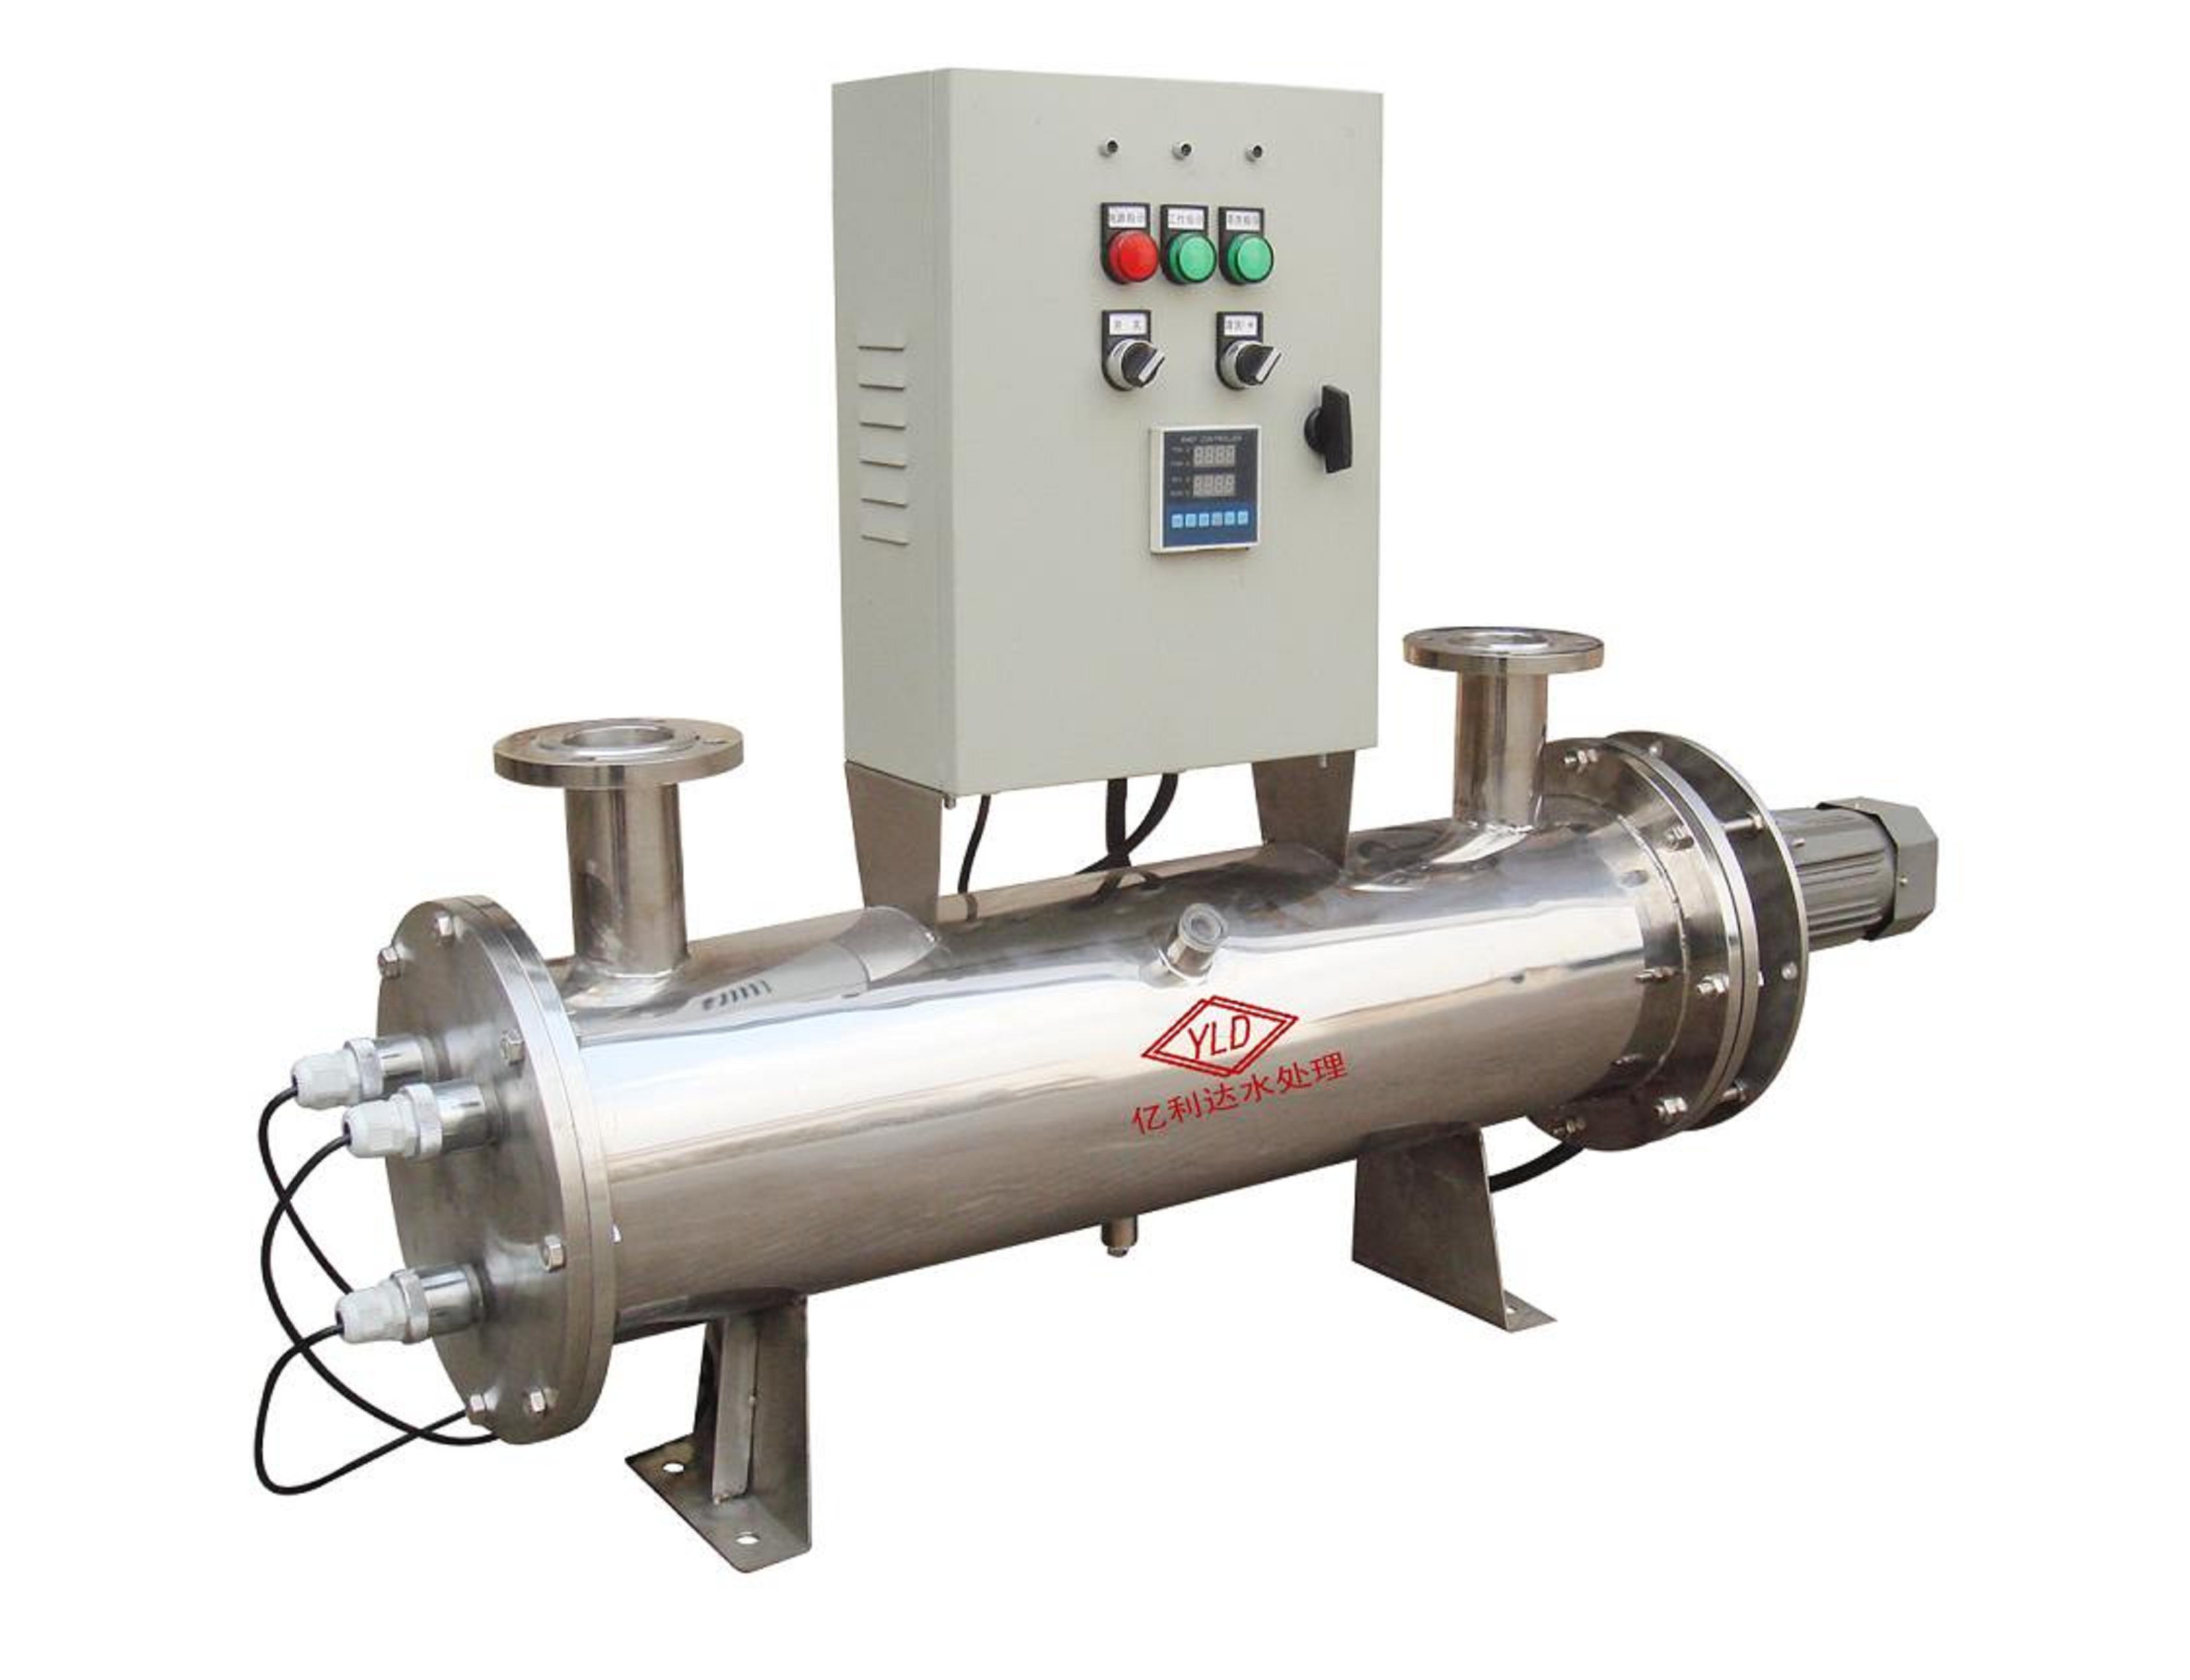 Ultraviolet Light Disinfection Vwater Treatment Systems